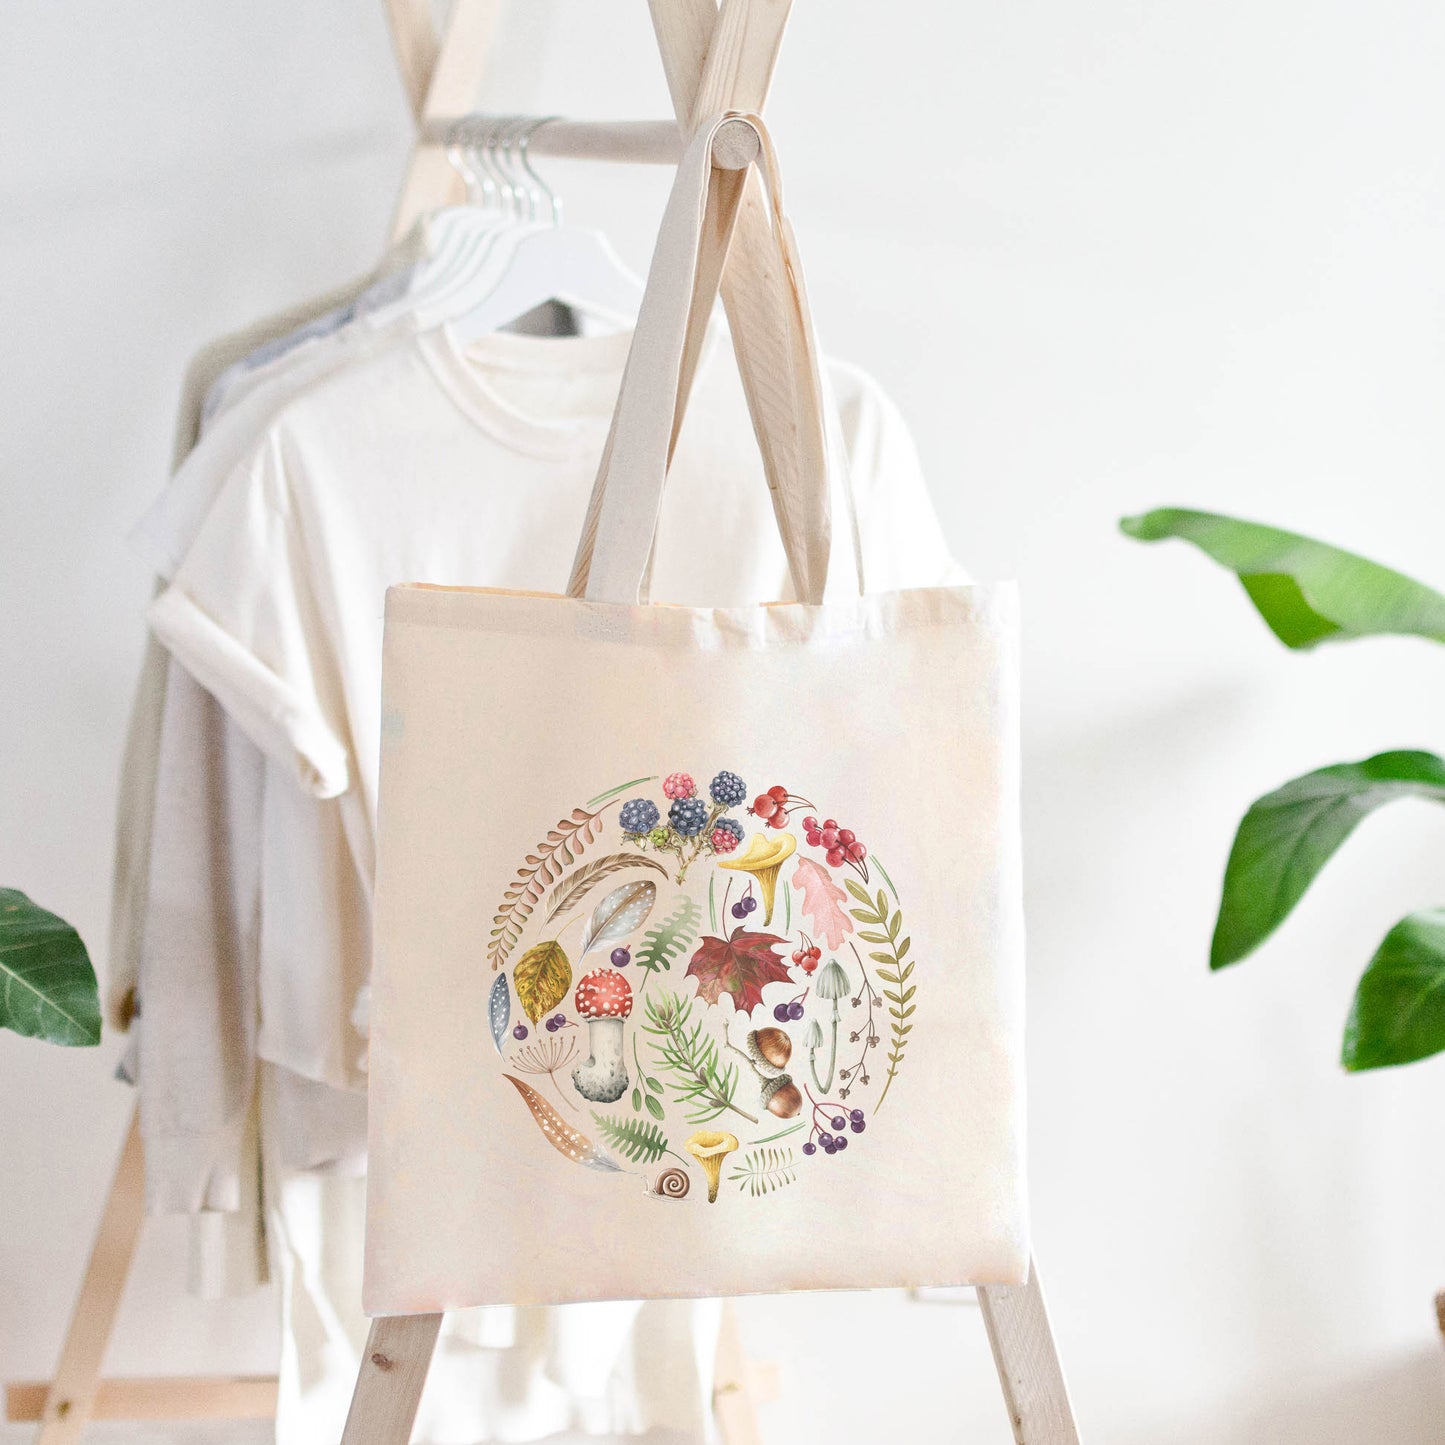 Pieces of Nature Tote Bag